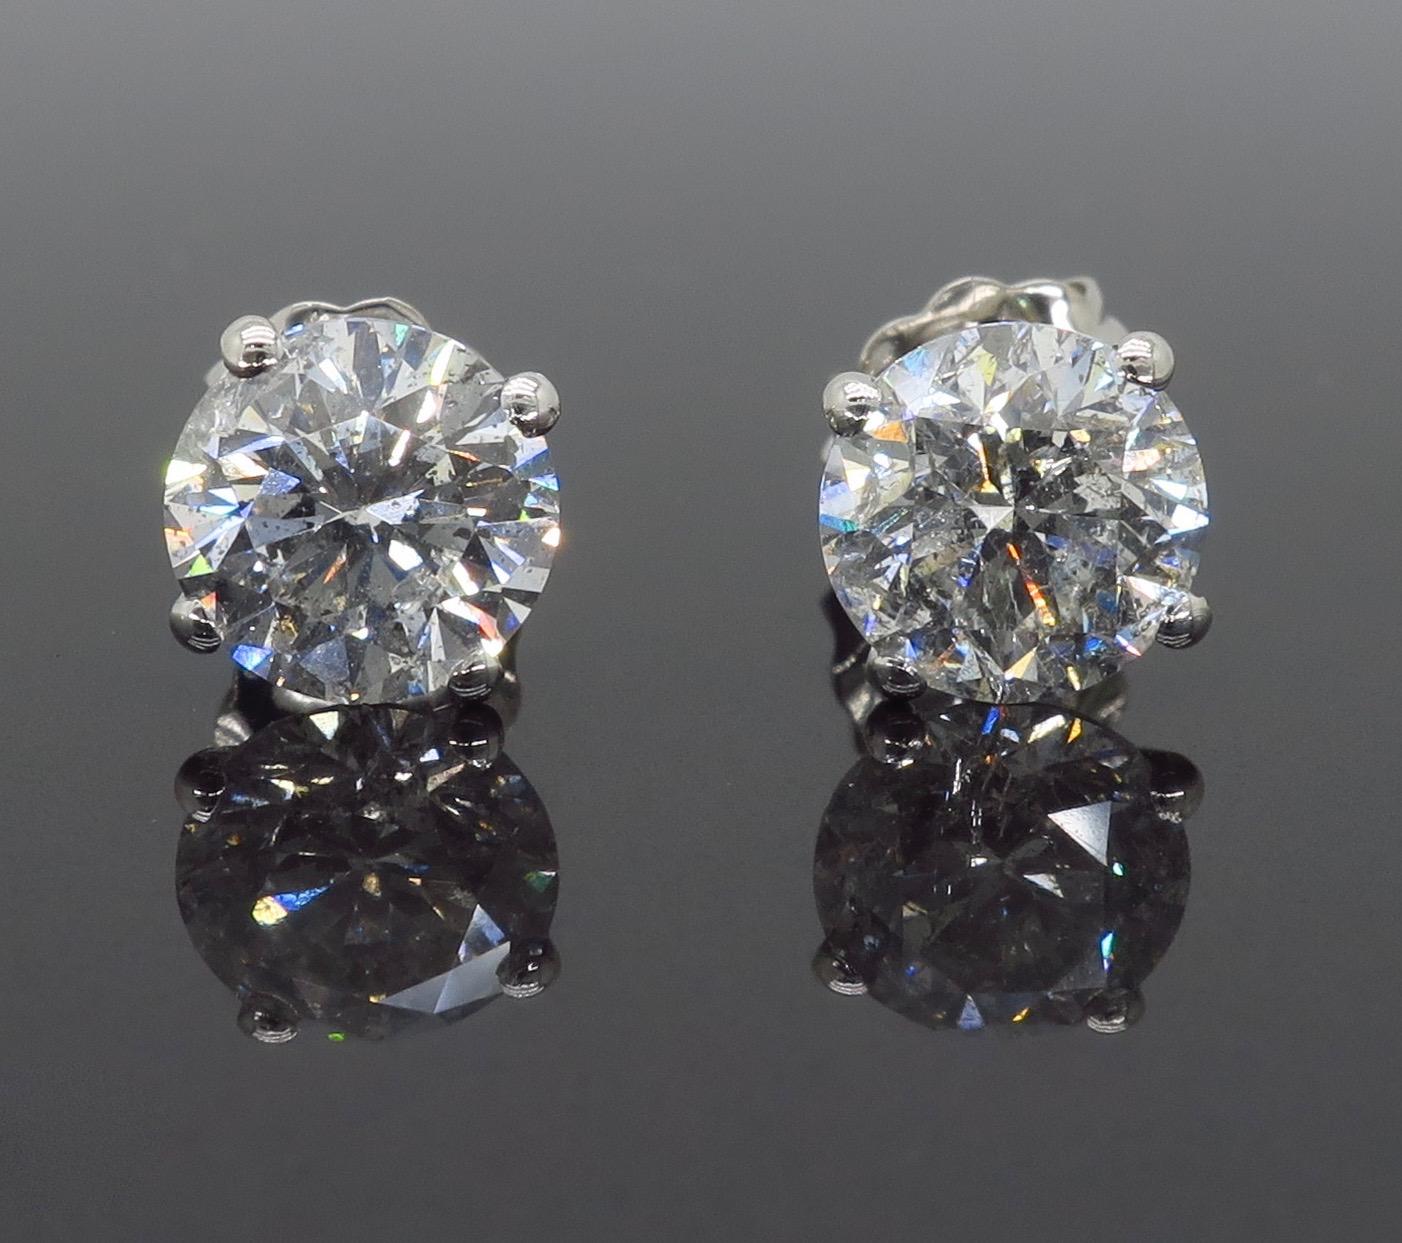 Classic 2.46CTW diamond stud earrings crafted in 14k white gold.

Diamond Carat Weight: Approximately 2.46CTW 
Diamond Cut: Round Brilliant Diamonds
Color: Average G-H
Clarity: Average I2
Metal: 14K White Gold 
Marked/Tested: Stamped “14K